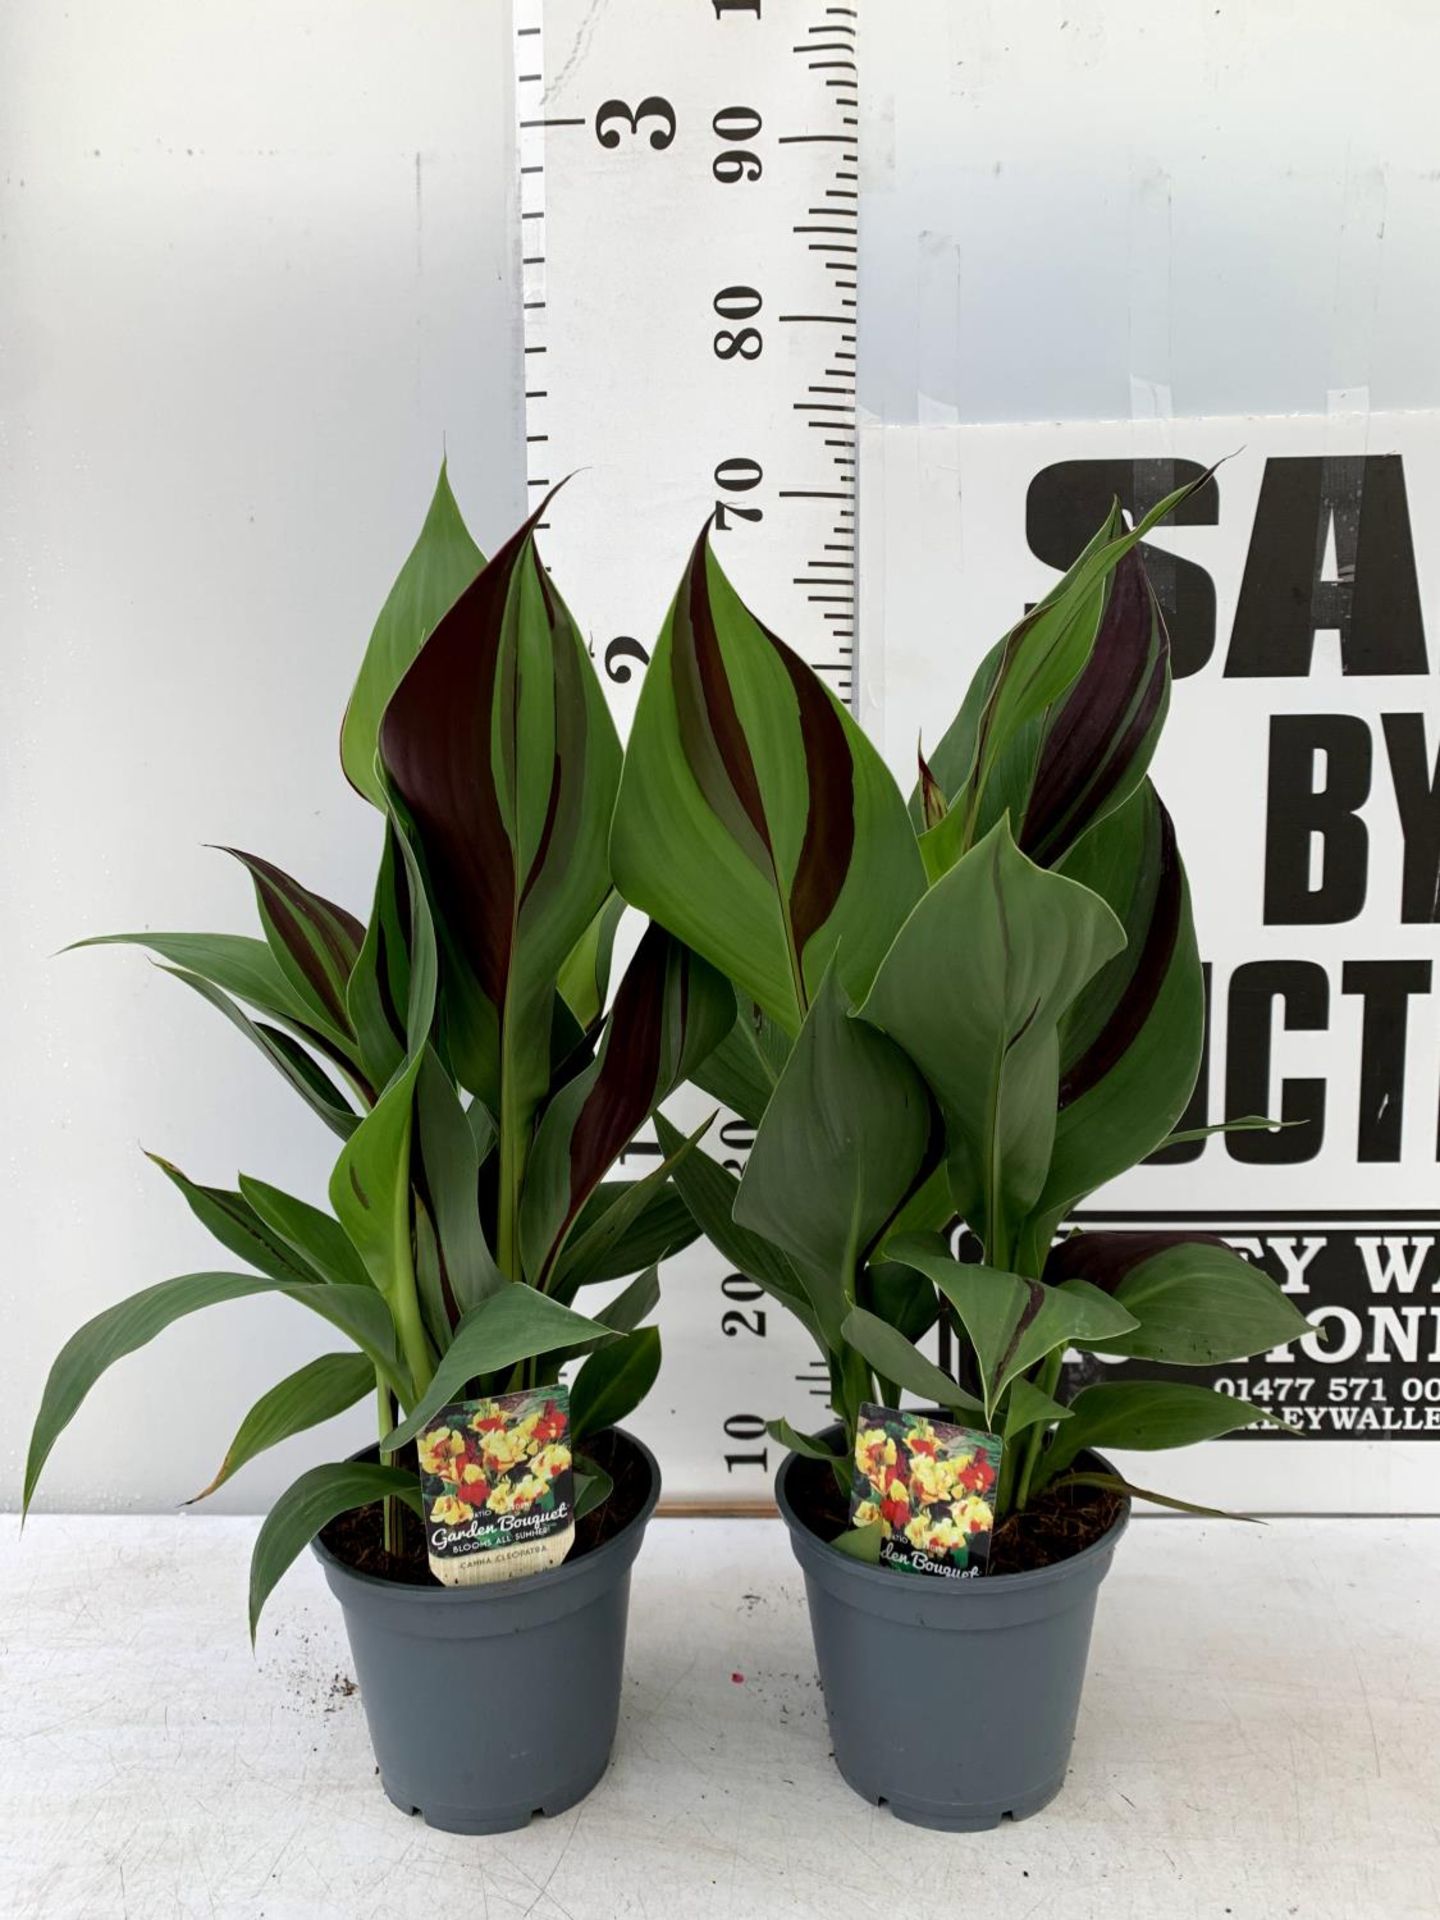 TWO EXCLUSIVE VARIETY CANNA CLEOPATRA APPROX 70CM IN HEIGHT IN 2 LTR POTS PLUS VAT TO BE SOLD FOR